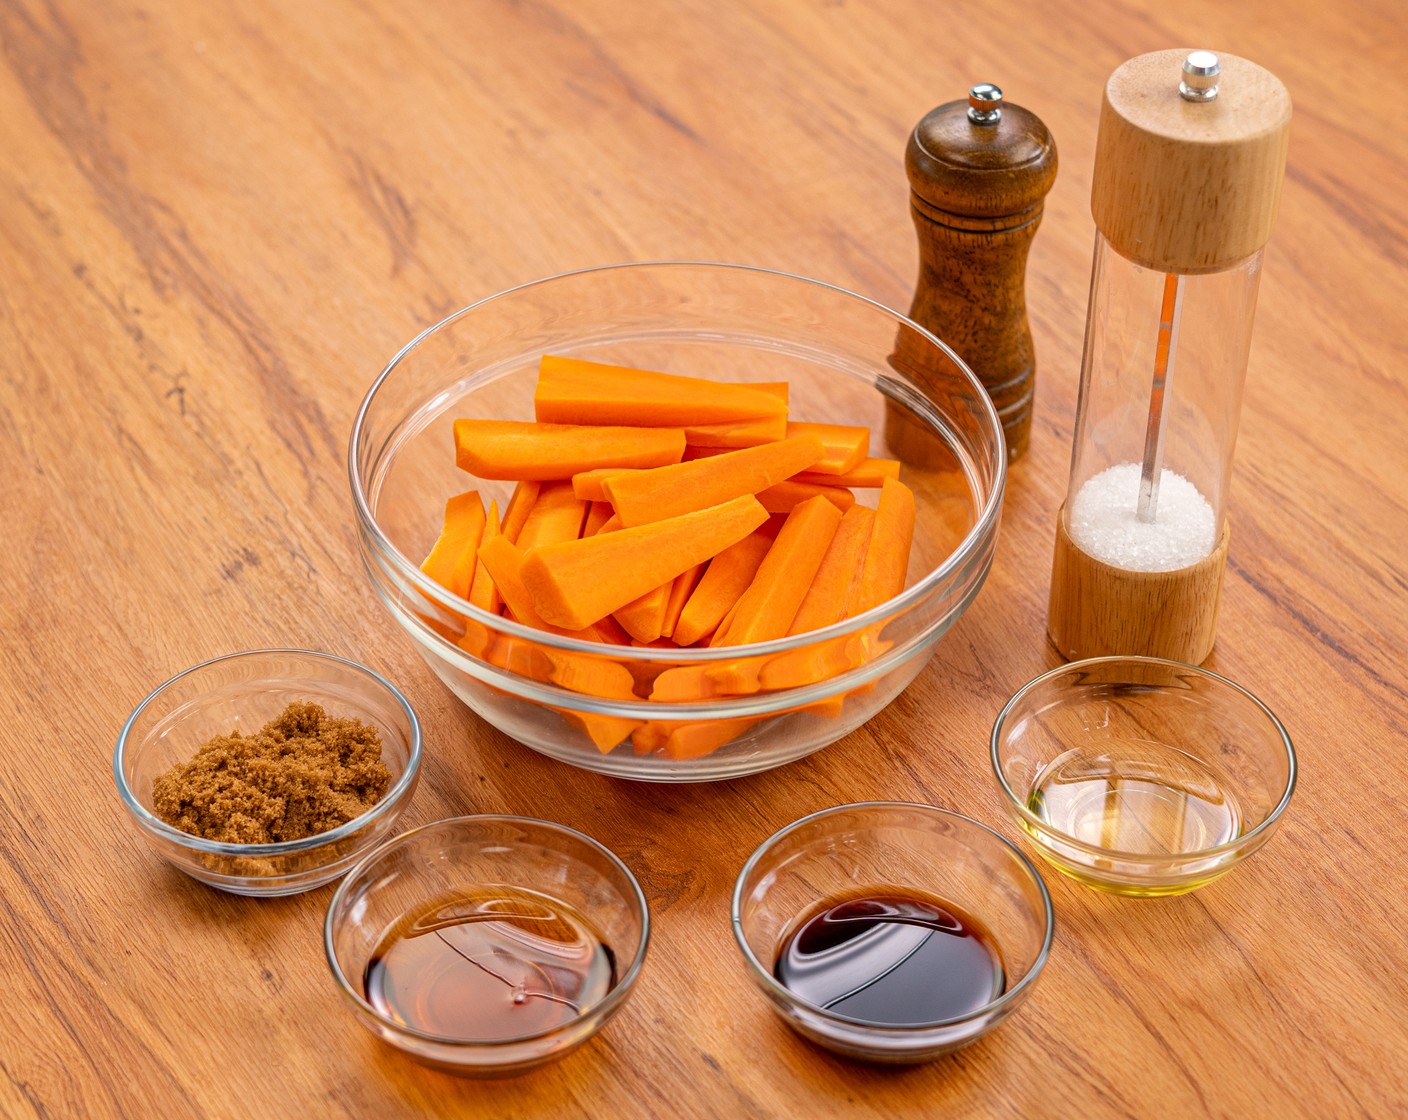 step 2 In a large mixing bowl, add the carrots along with Brown Sugar (2 Tbsp), Maple Syrup (2 Tbsp), Balsamic Vinegar (1 Tbsp), Olive Oil (1 Tbsp), Salt (1/4 tsp), and Ground Black Pepper (1/4 tsp). Toss until combined.